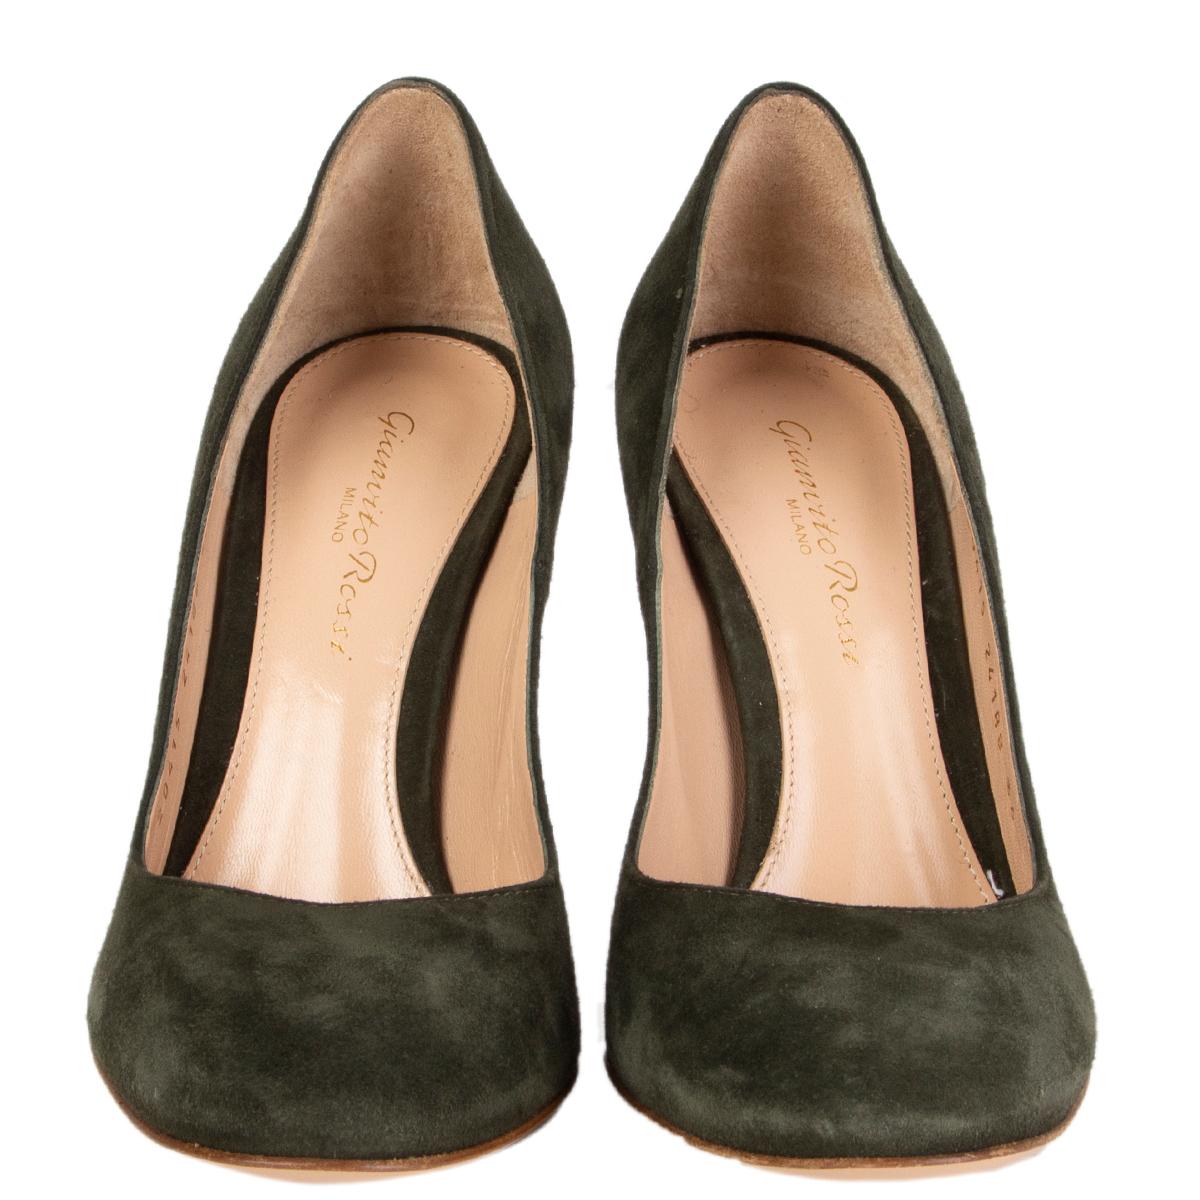 100% authentic Gianvito Rossi Florence round-toe pumps in olive green suede. Brand new.

Measurements
Imprinted Size	36
Shoe Size	36
Inside Sole	23.5cm (9.2in)
Width	7cm (2.7in)
Heel	10cm (3.9in)

All our listings include only the listed item unless